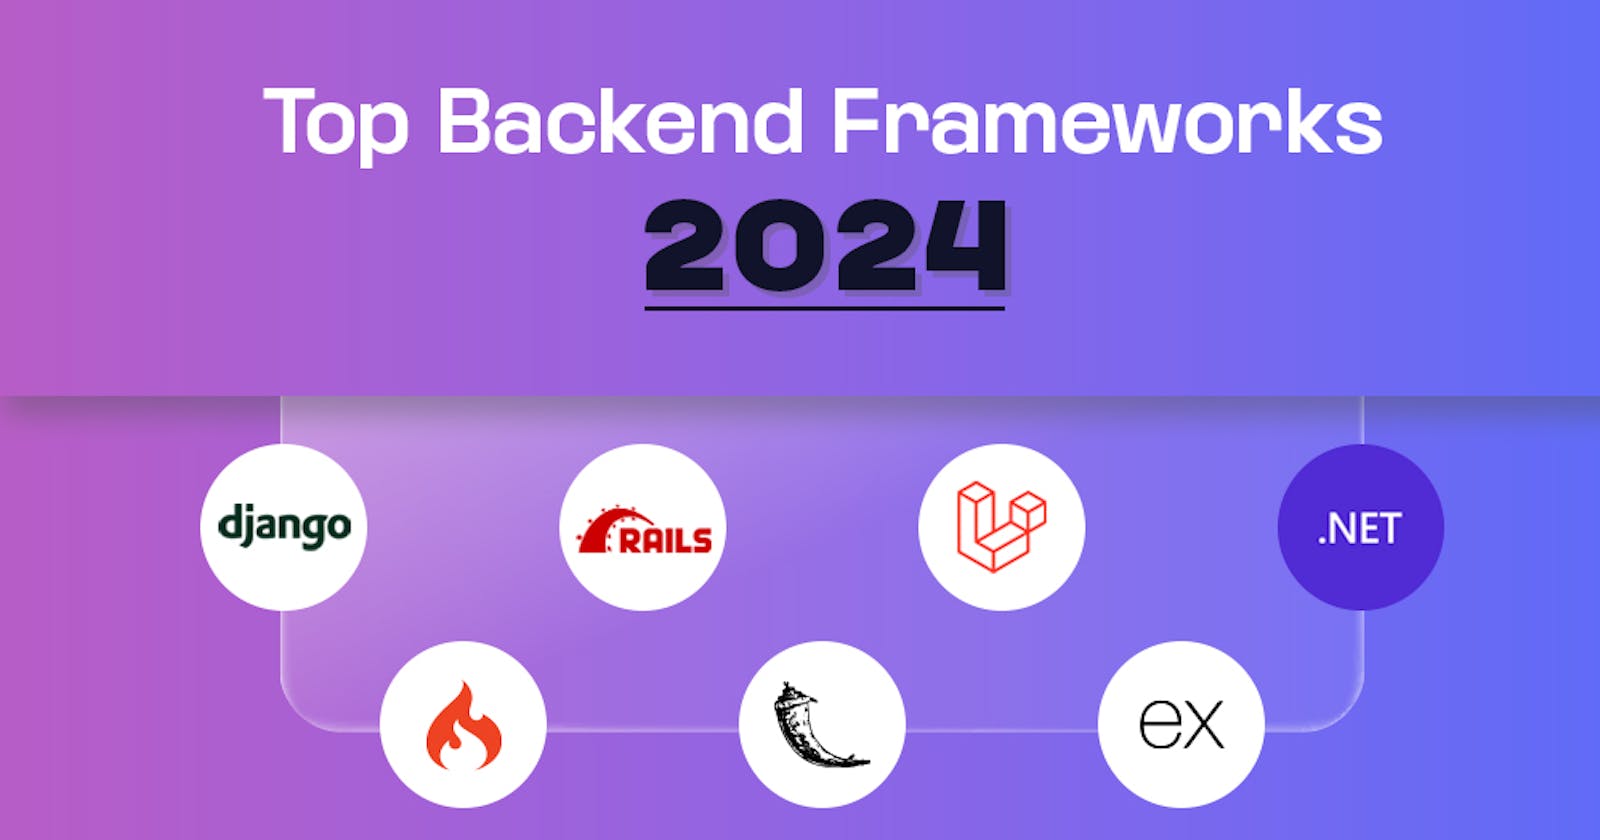 Top 7 Backend Frameworks That Will Dominate Web Development in 2024 🚀